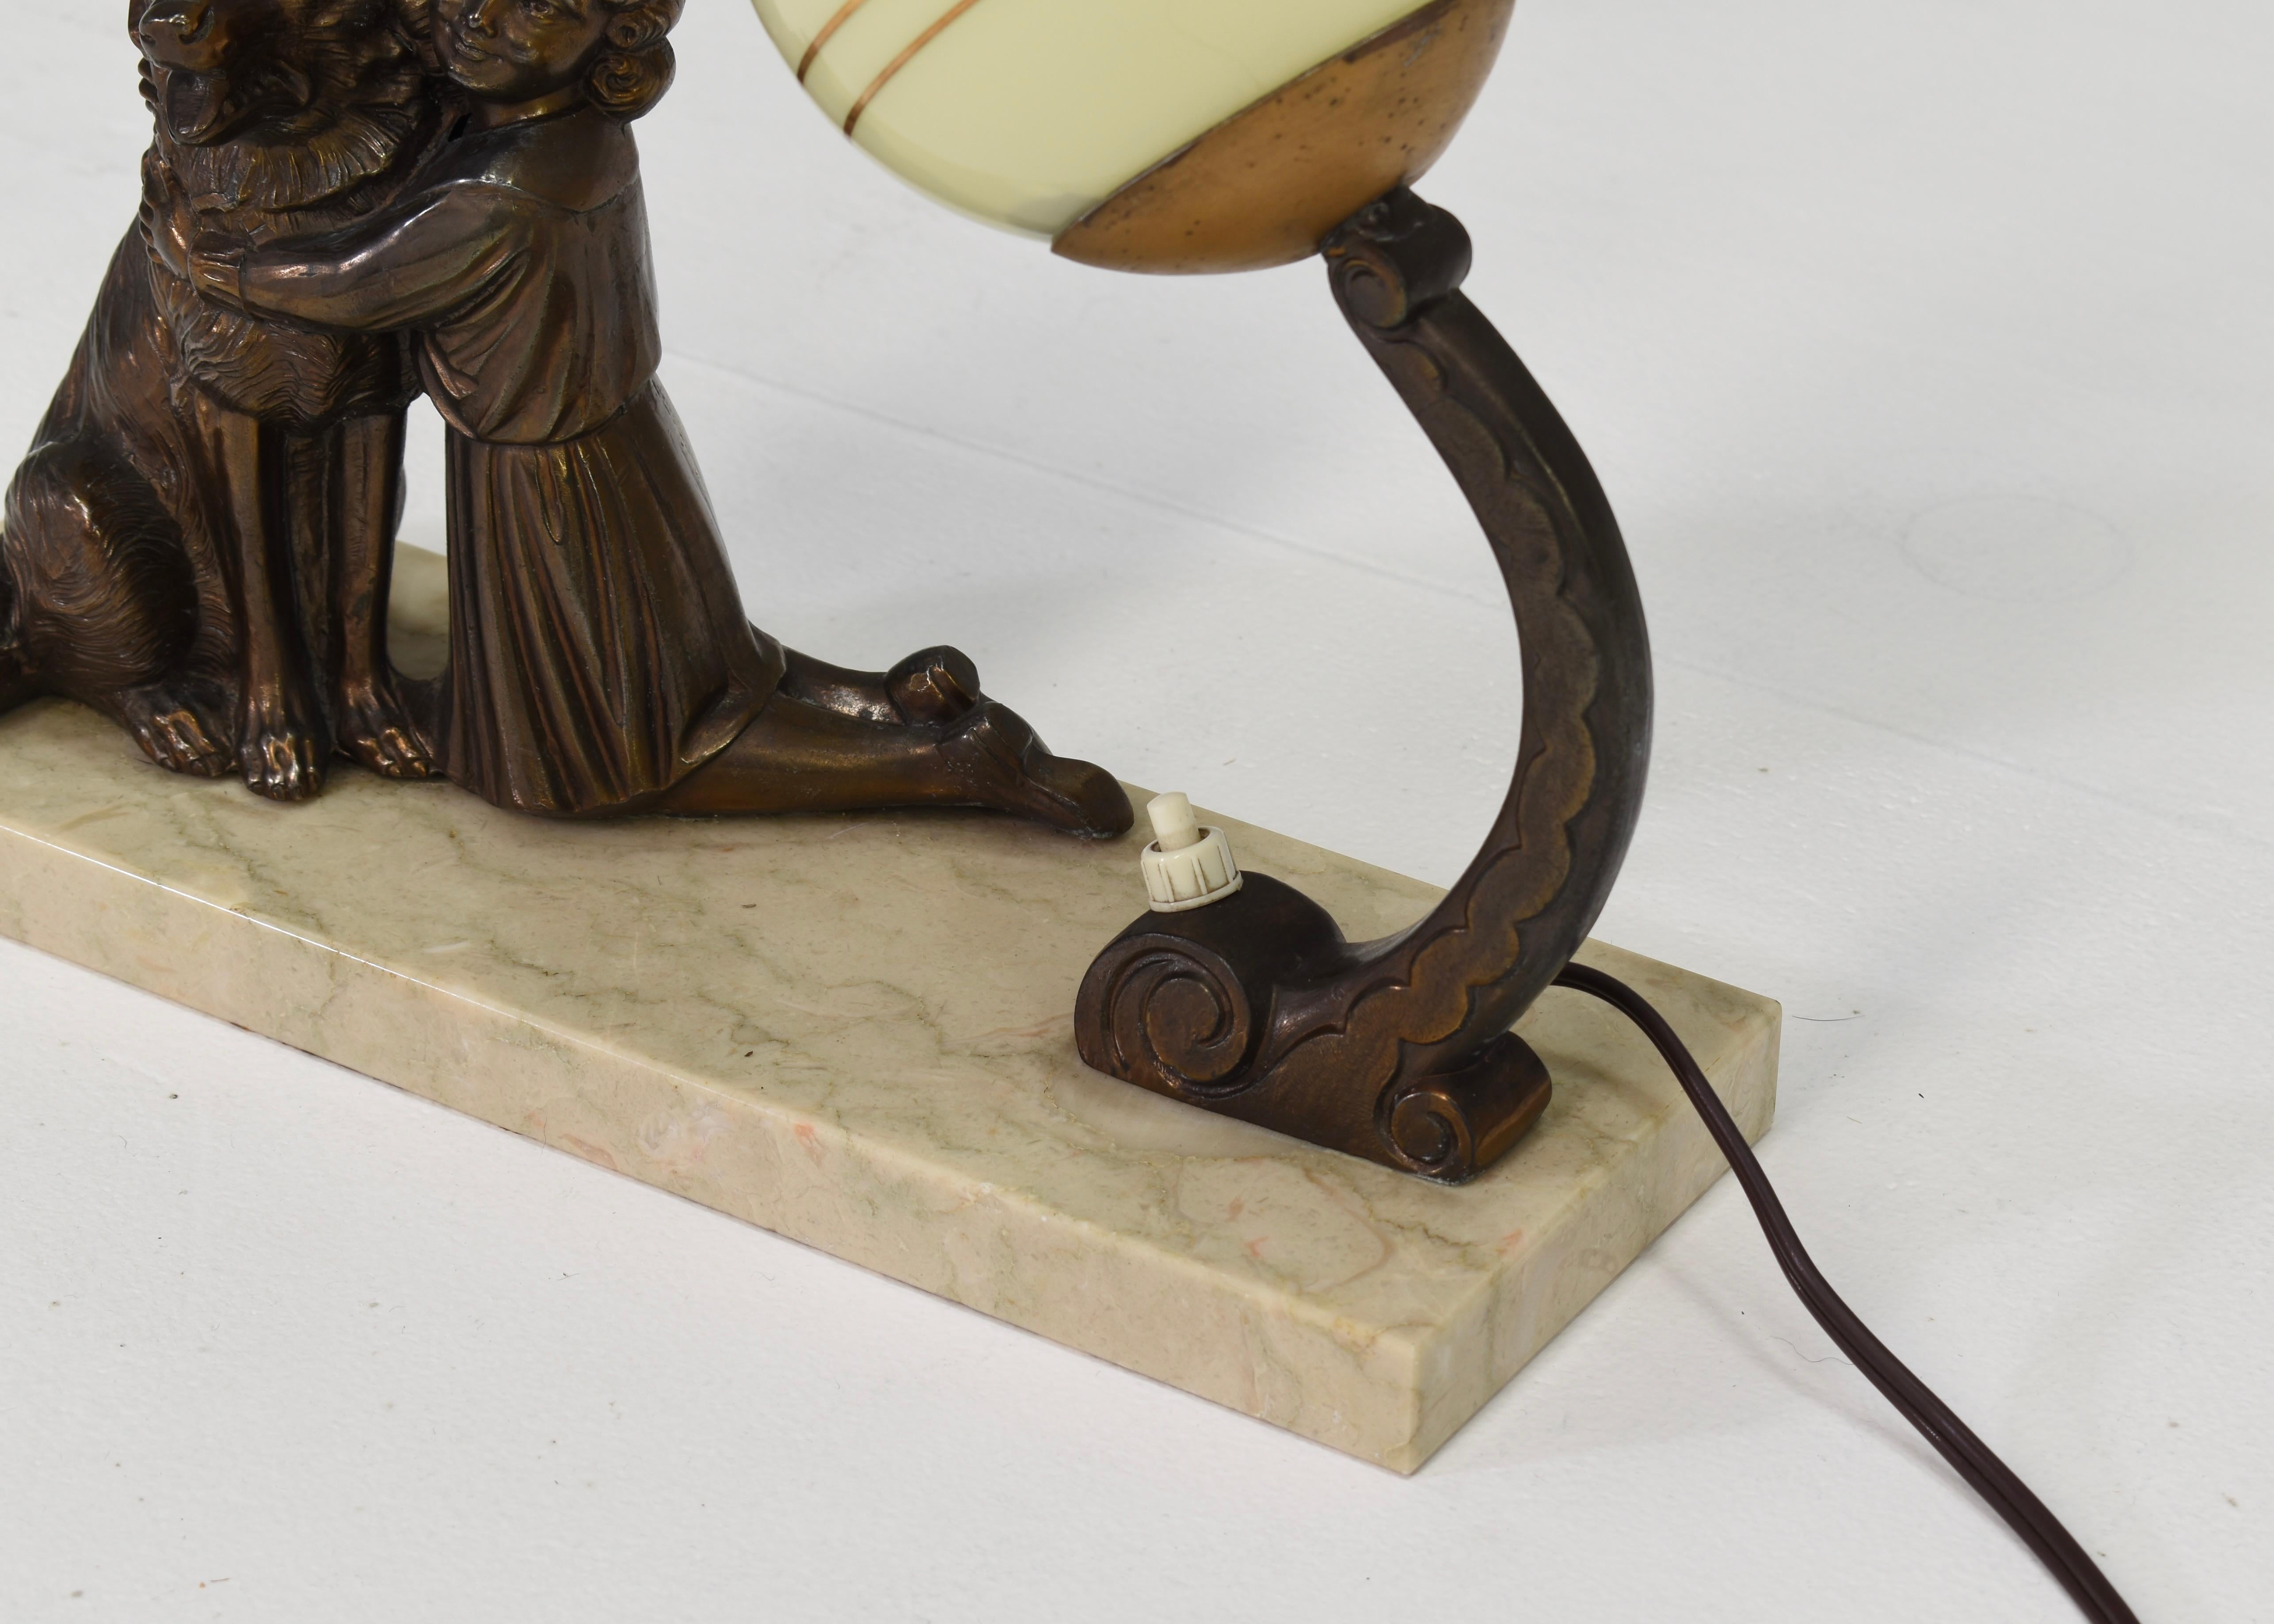 French Art Deco Desk Table Lamp Girl and German Shepherd Sculpture, circa 1930 For Sale 3